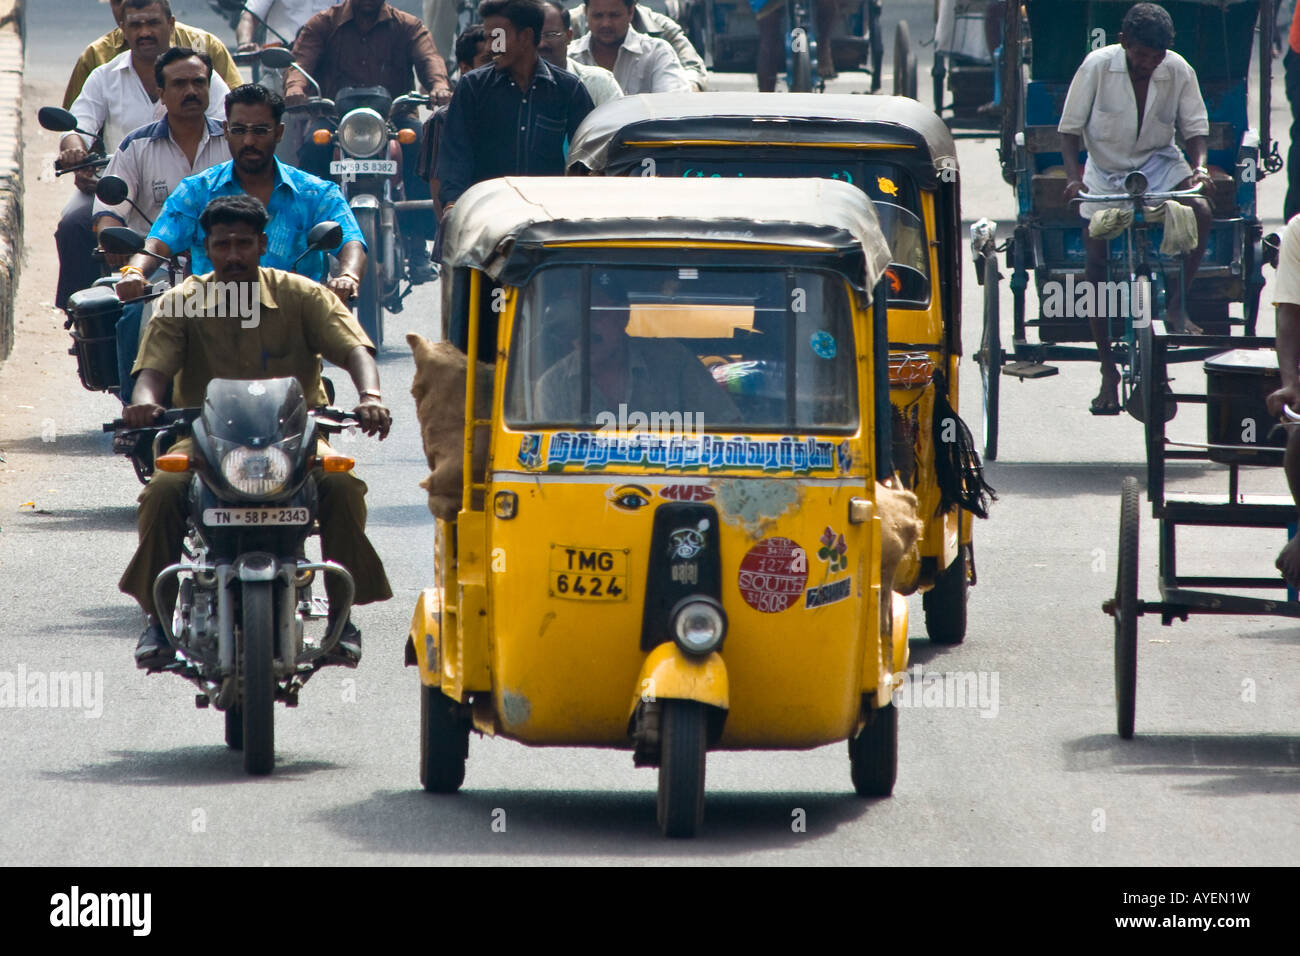 Crowded Street Traffic in Madurai South India Stock Photo